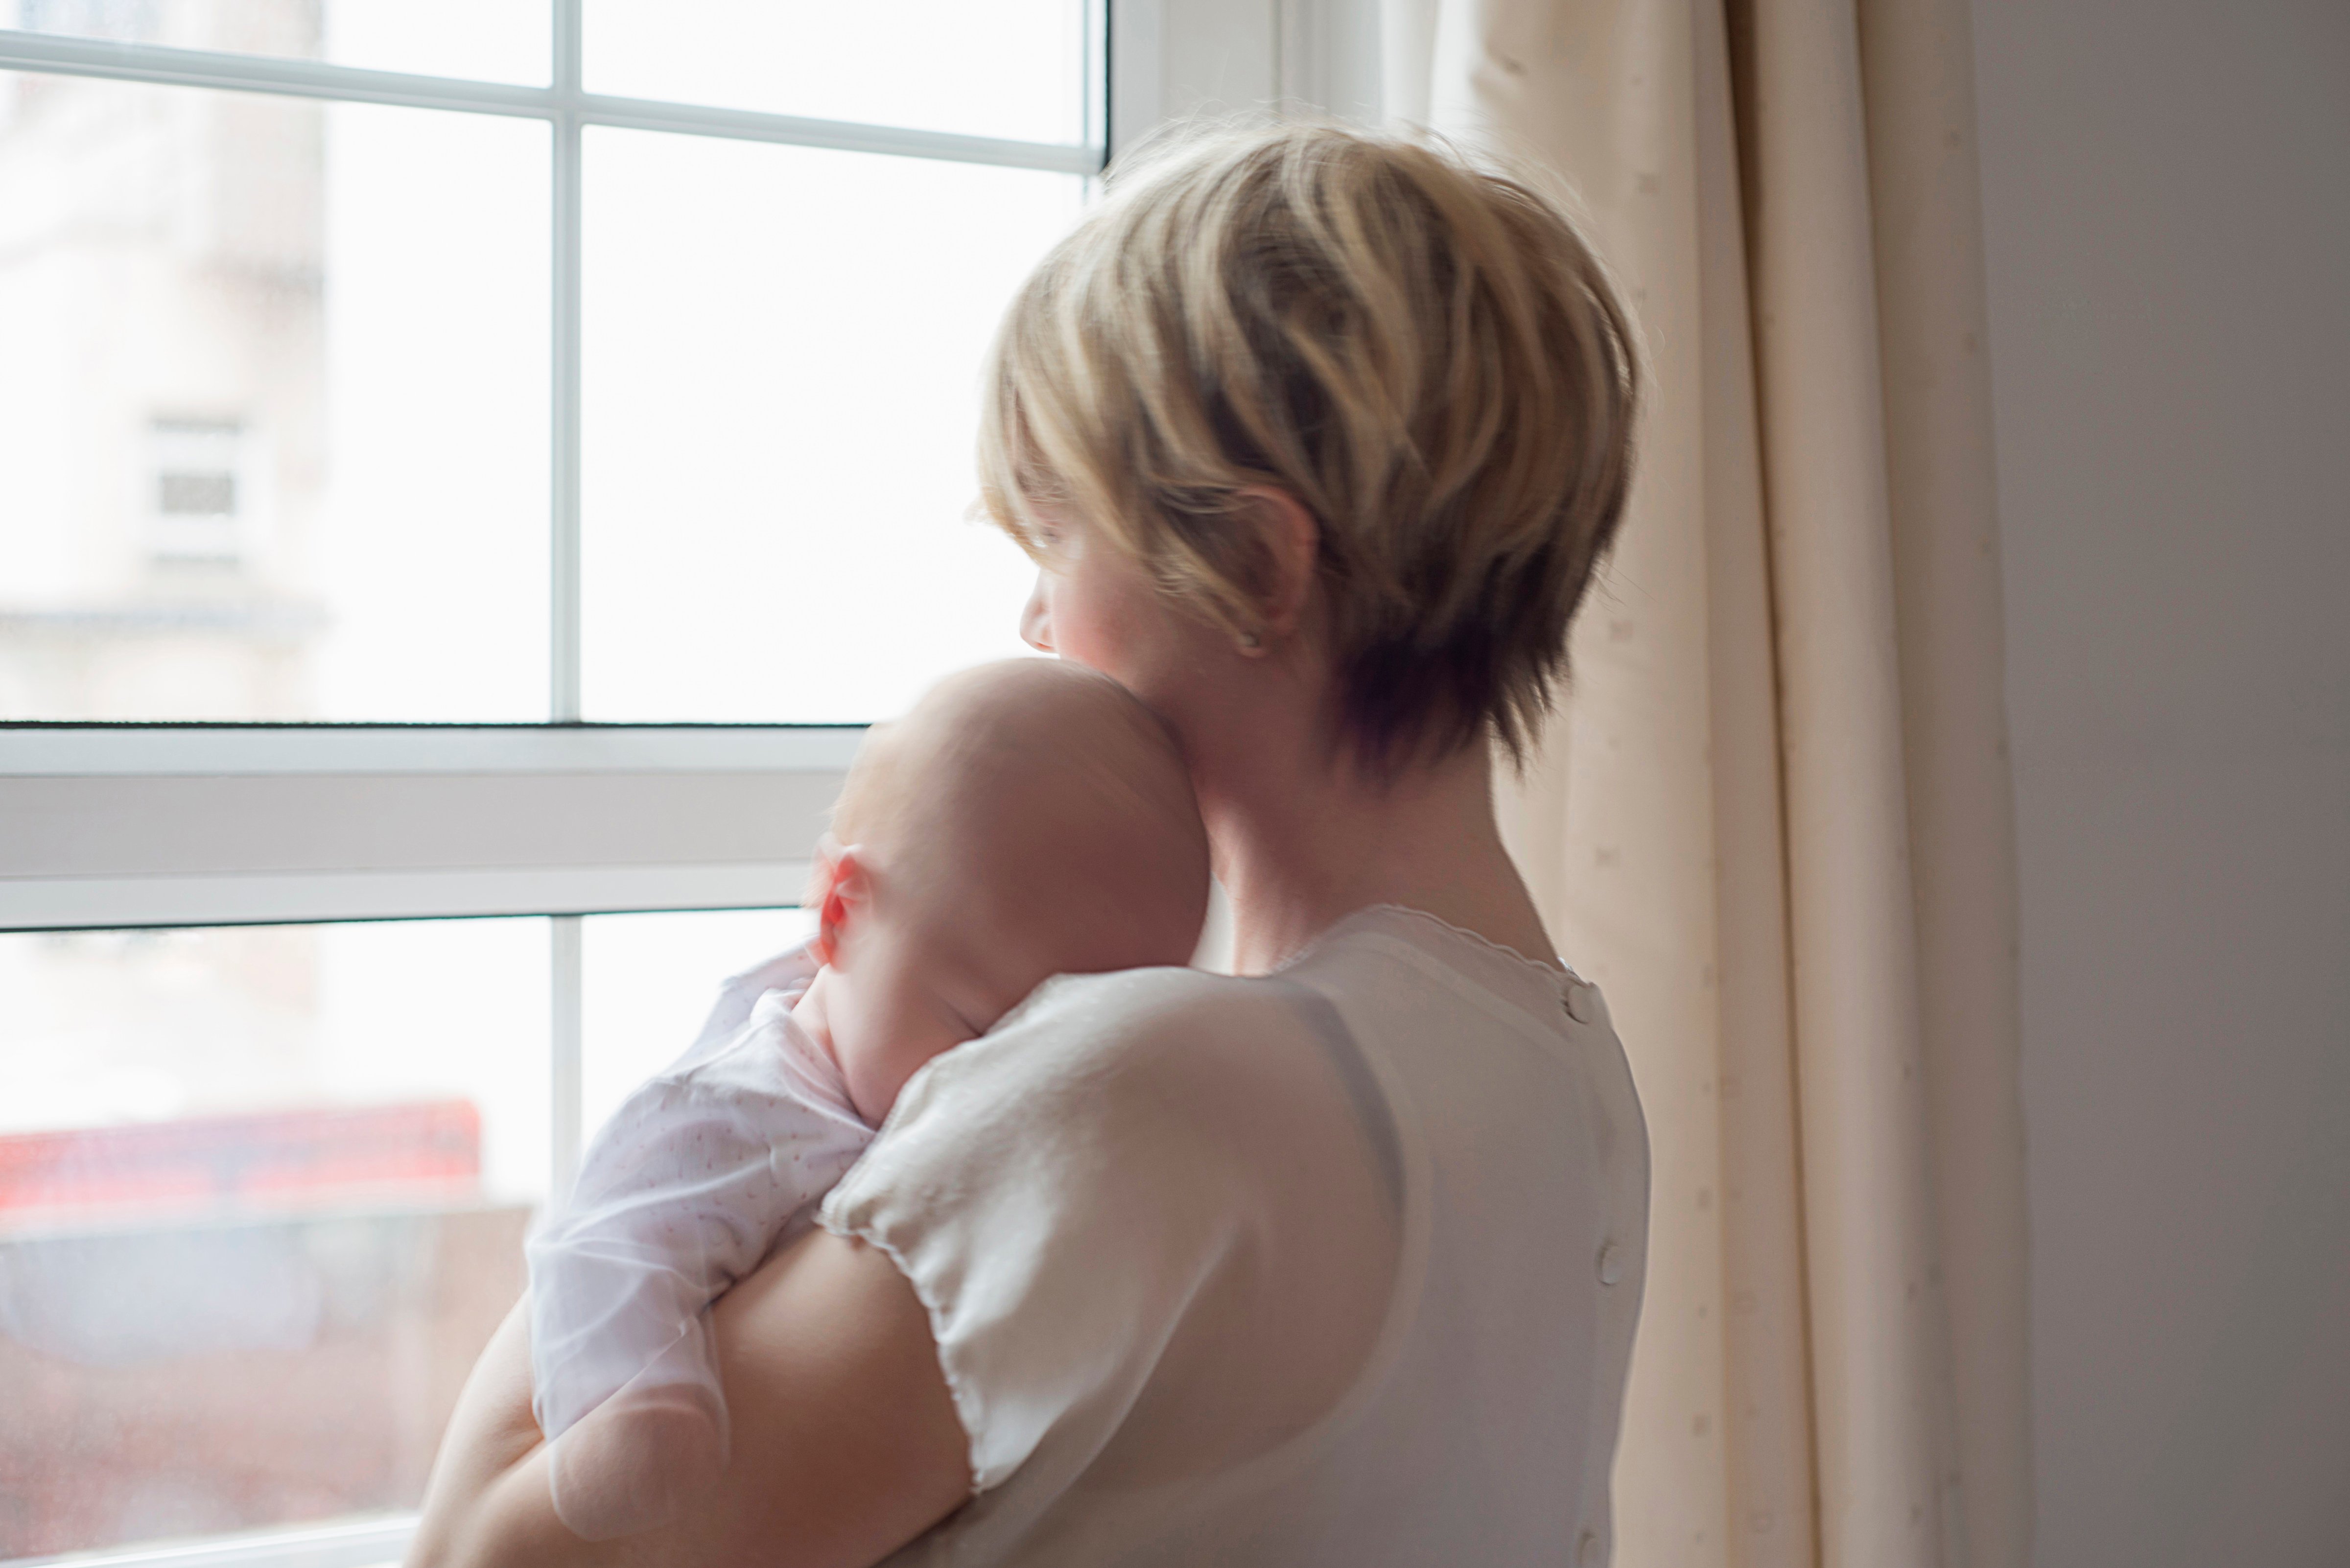 Mother carrying sleeping baby girl, looking out window (Getty Images)